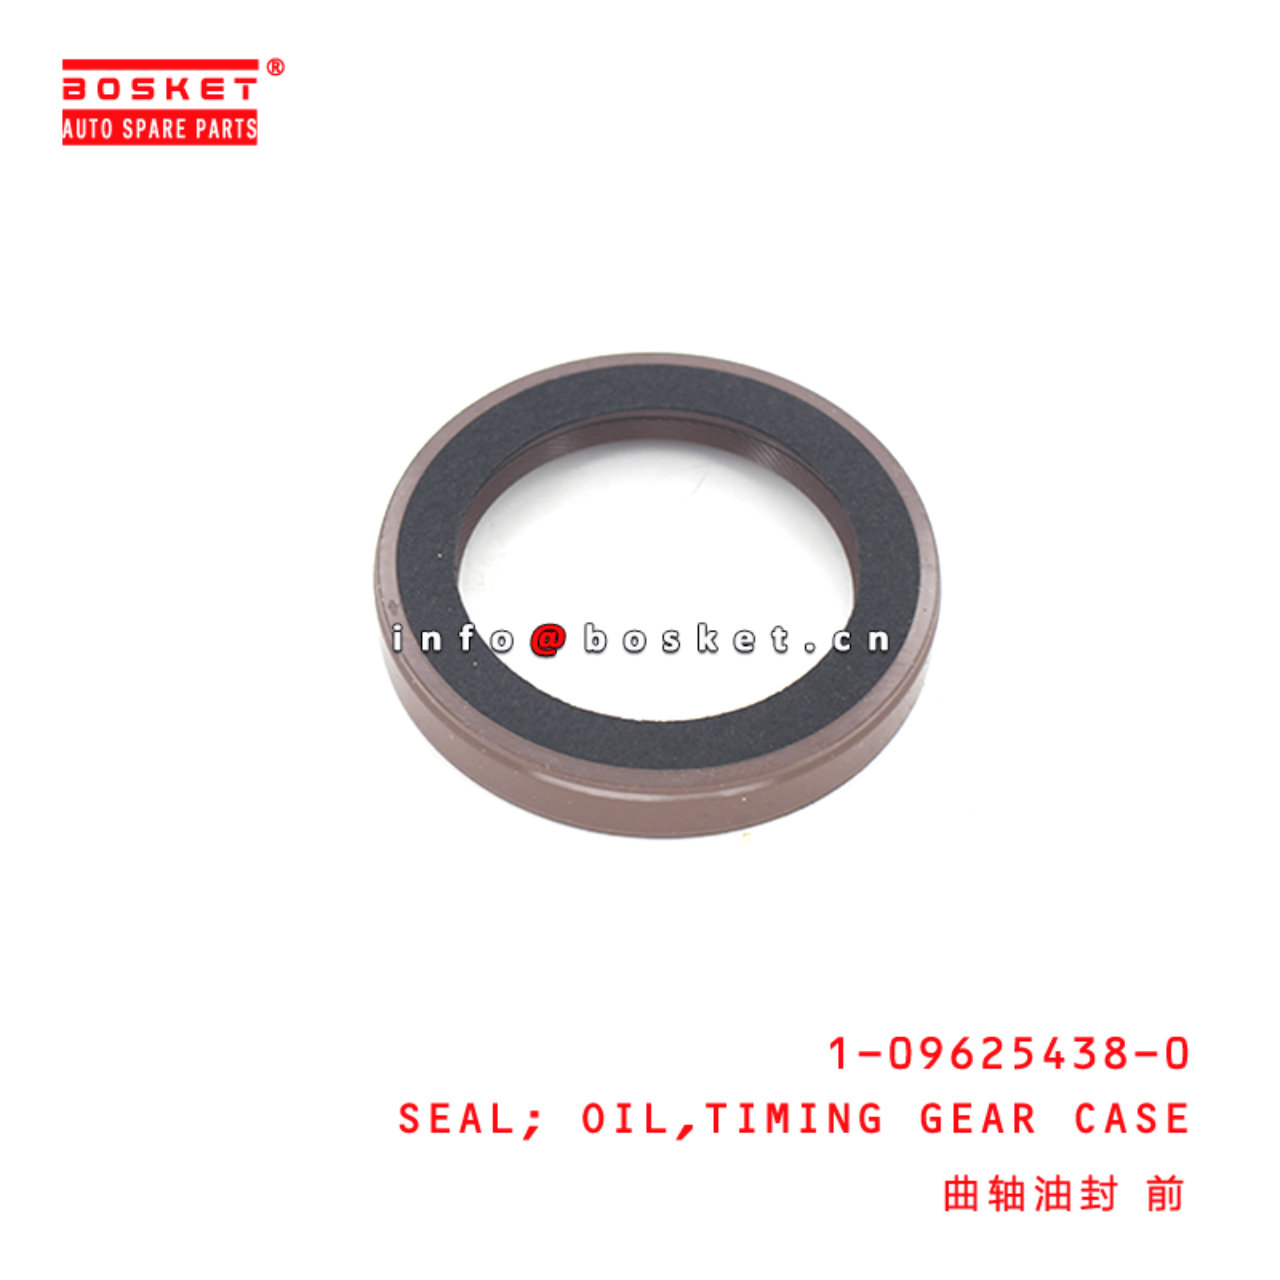 1-09625438-0 Timing Gear Case Oil Seal 1096254380 Suitable for ISUZU NMR 4BD1 6BD1